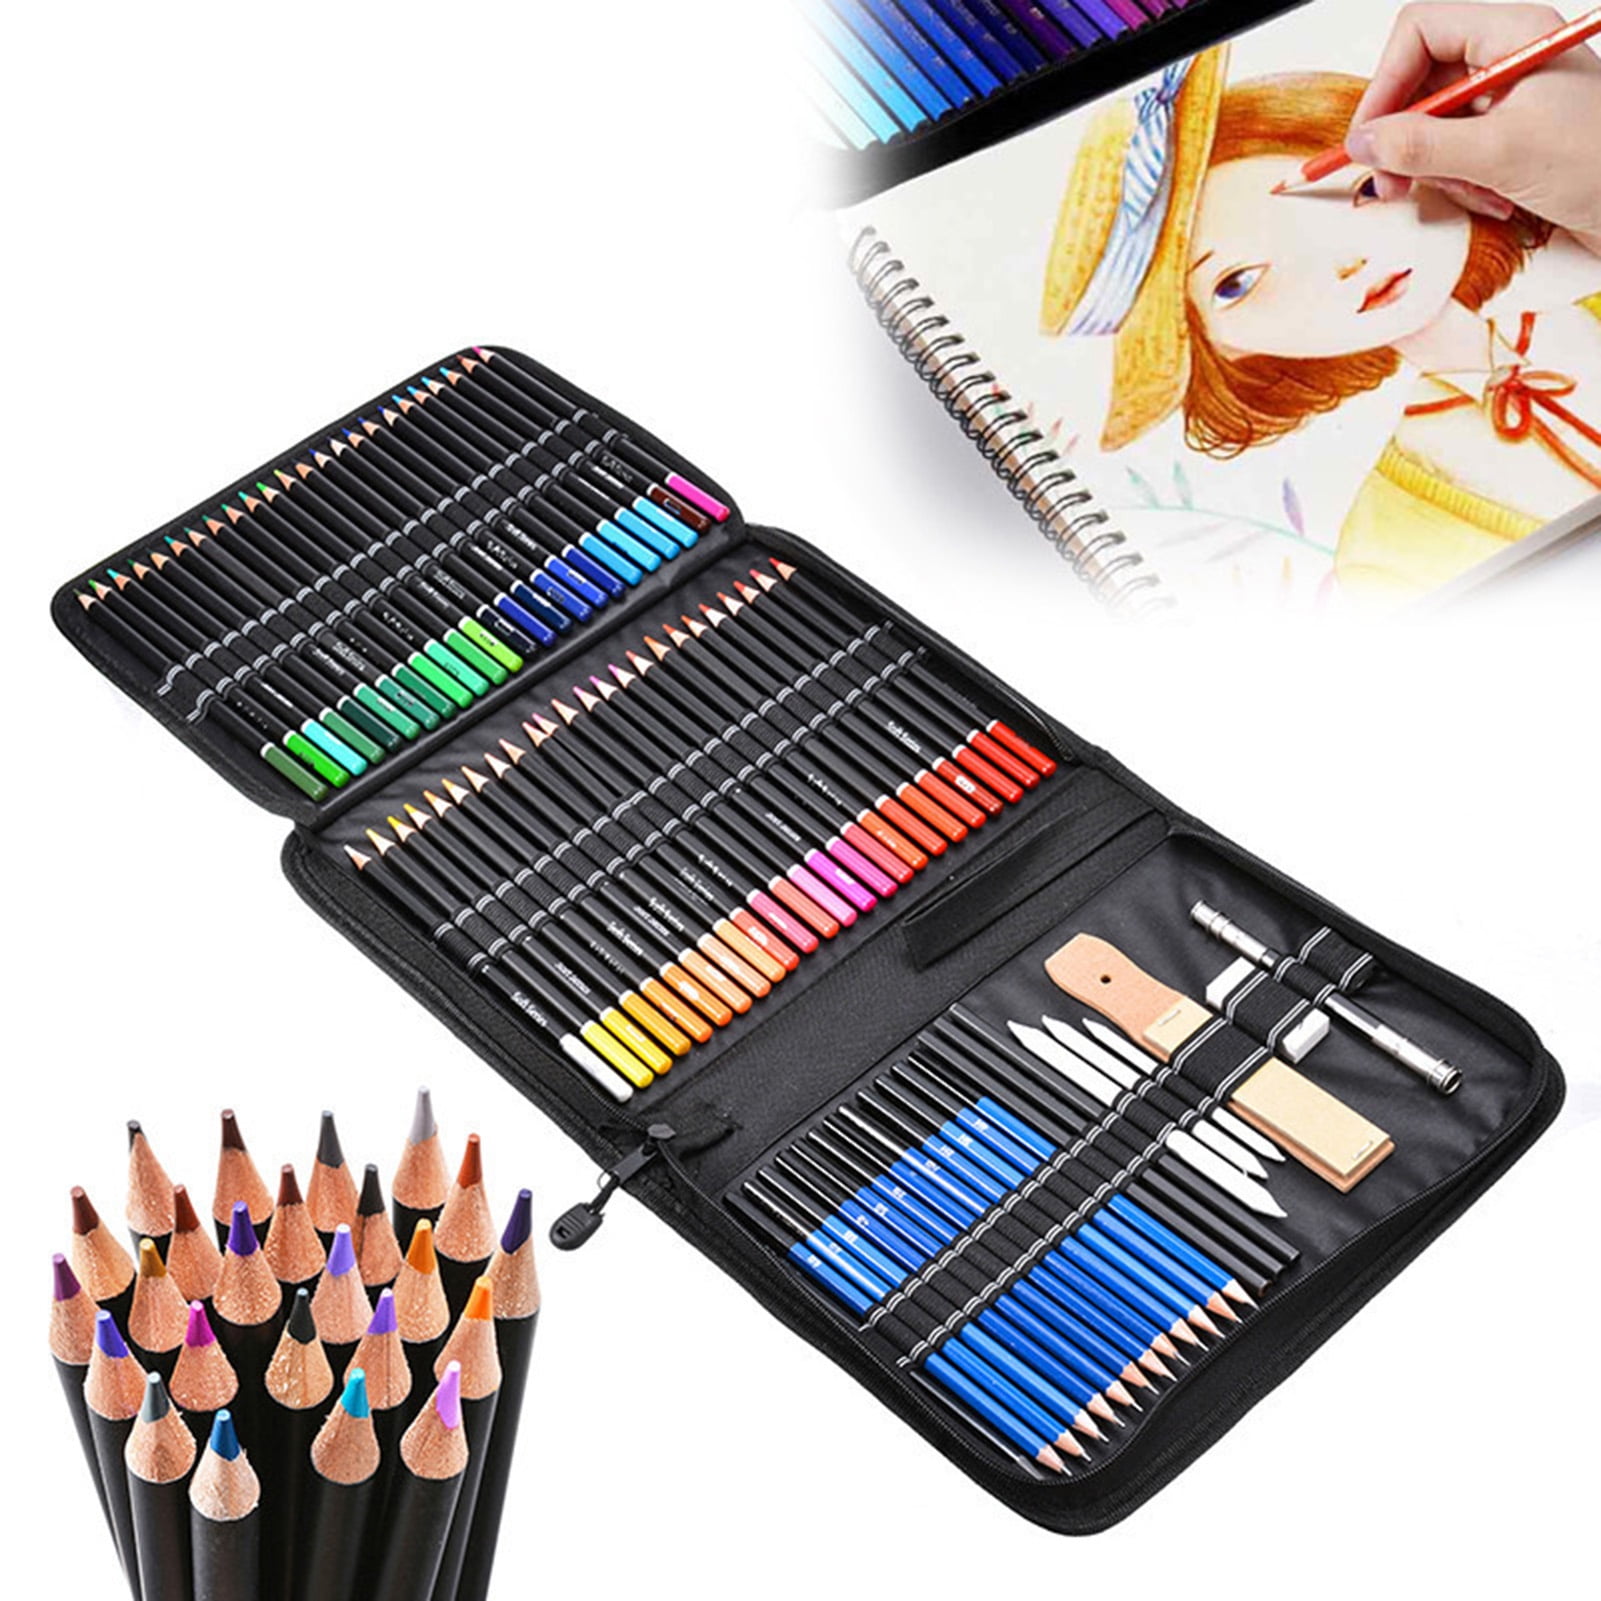 Soucolor 73-Pack Art Supplies for Adults Teens Kids Beginners